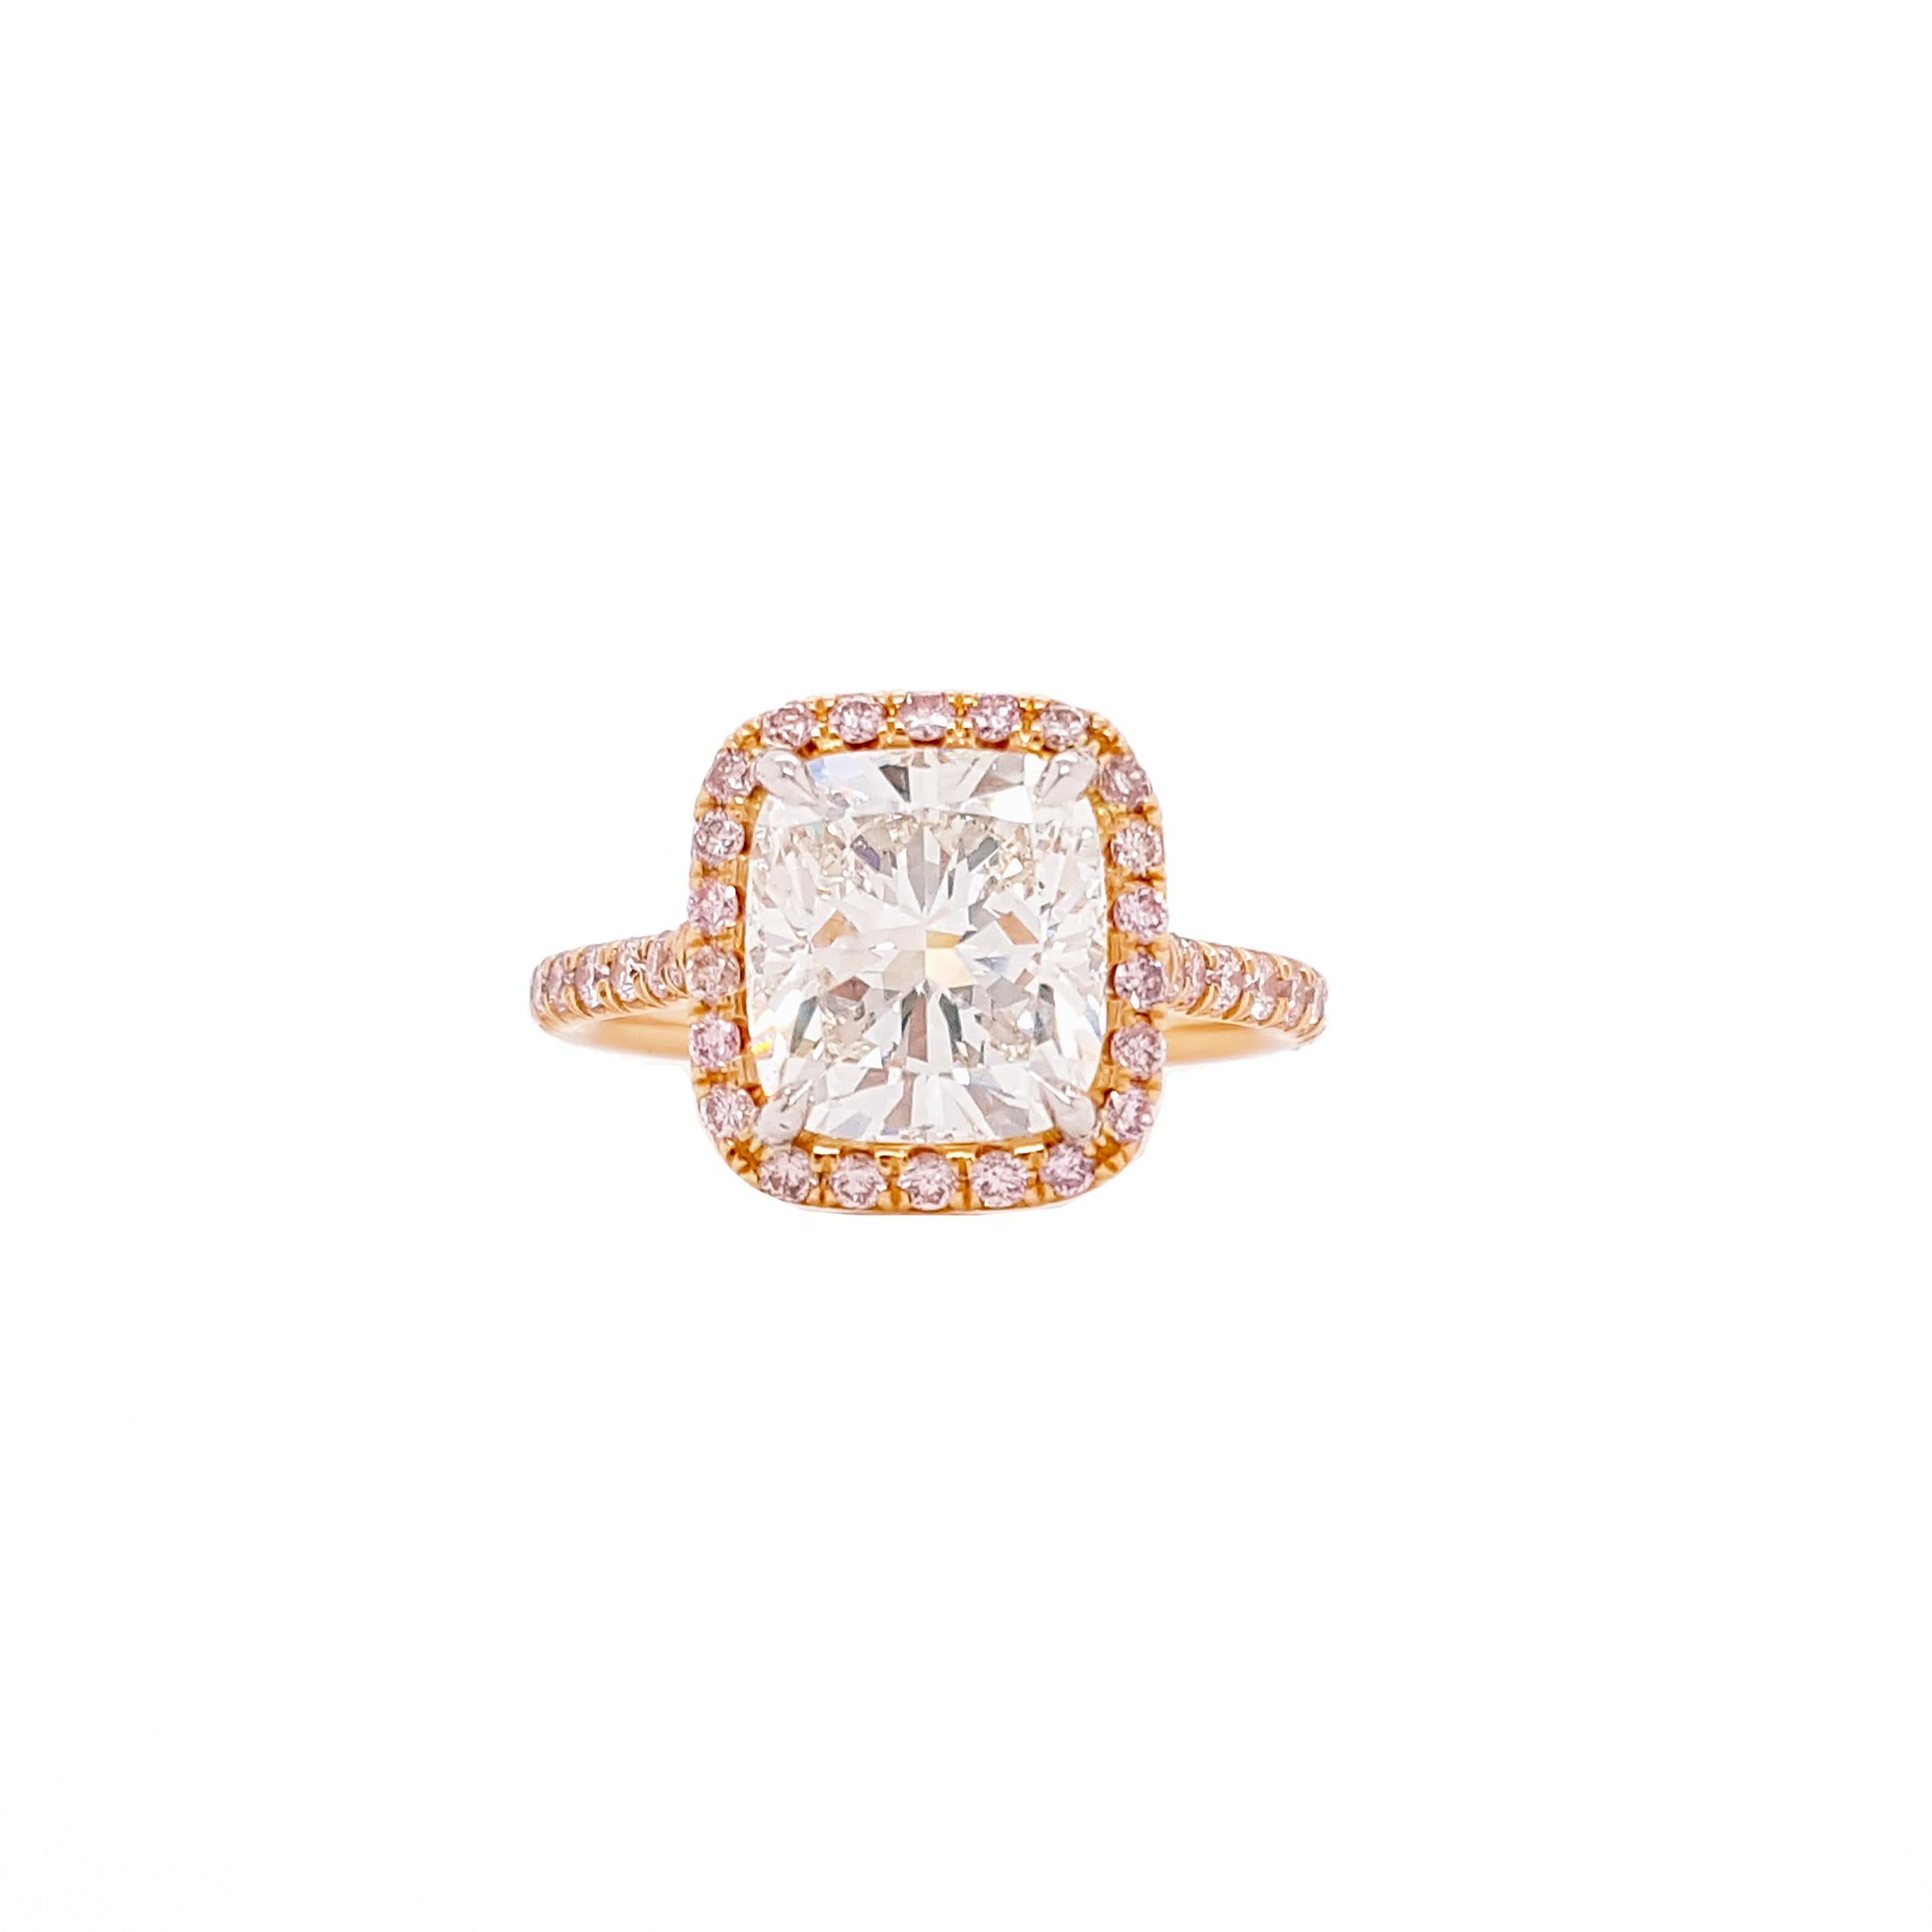 Engagement ring style showcasing a 3.5 carat cushion cut diamond certified by GIA as I color, VS2 clarity. The classic design brings out the beauty of the center stone with the surrounding 42 round pink diamonds, set in a polished 18k Rose gold